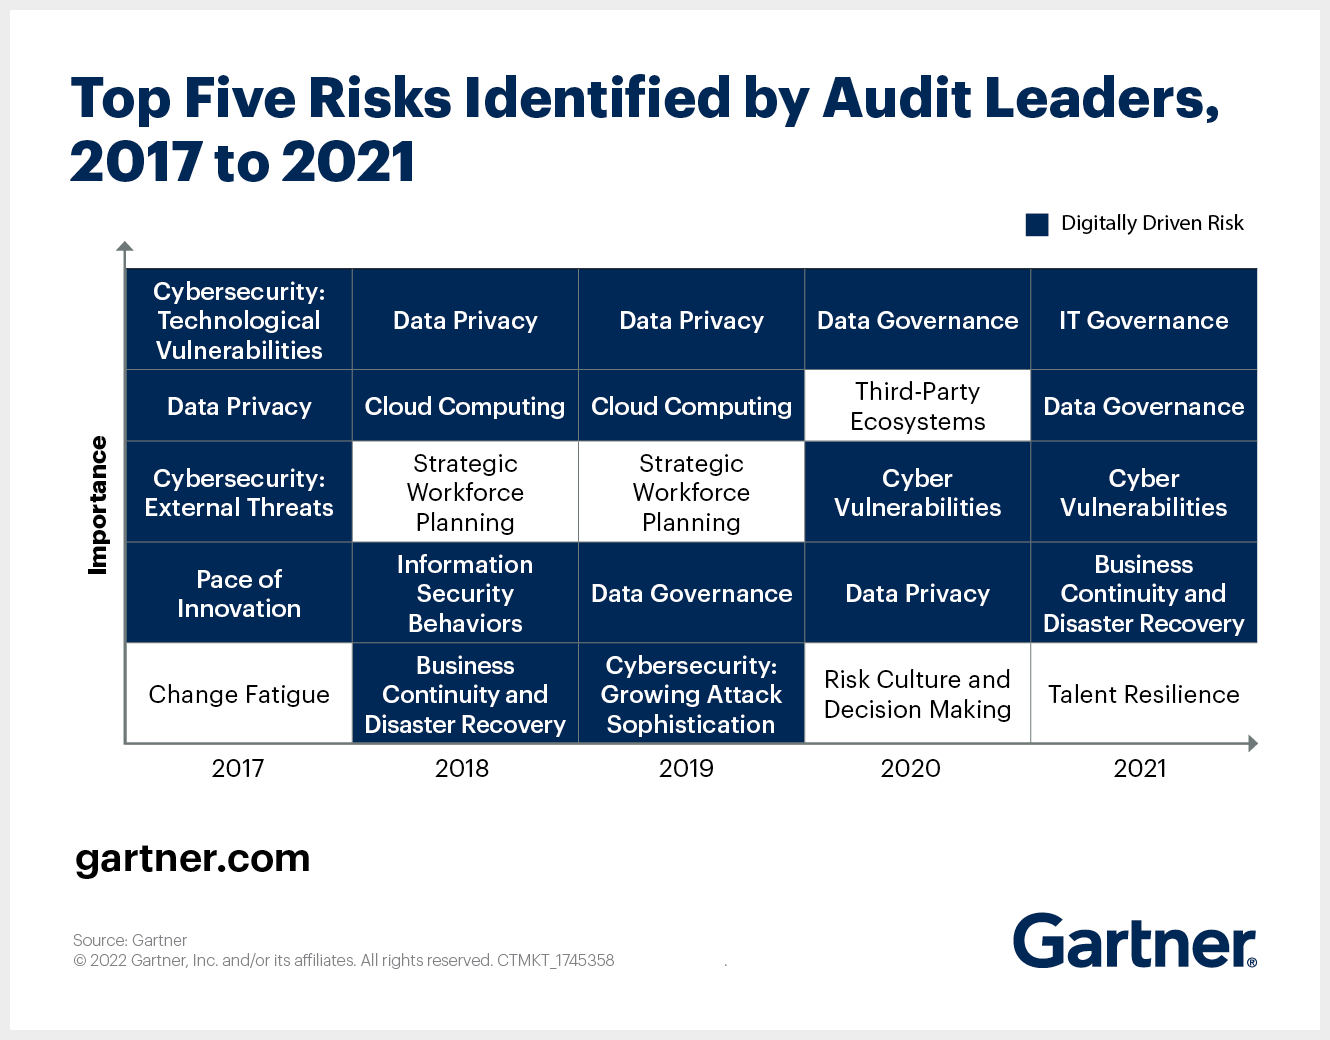 Top Five Risks Identified by Audit Leaders, 2017 to 2021